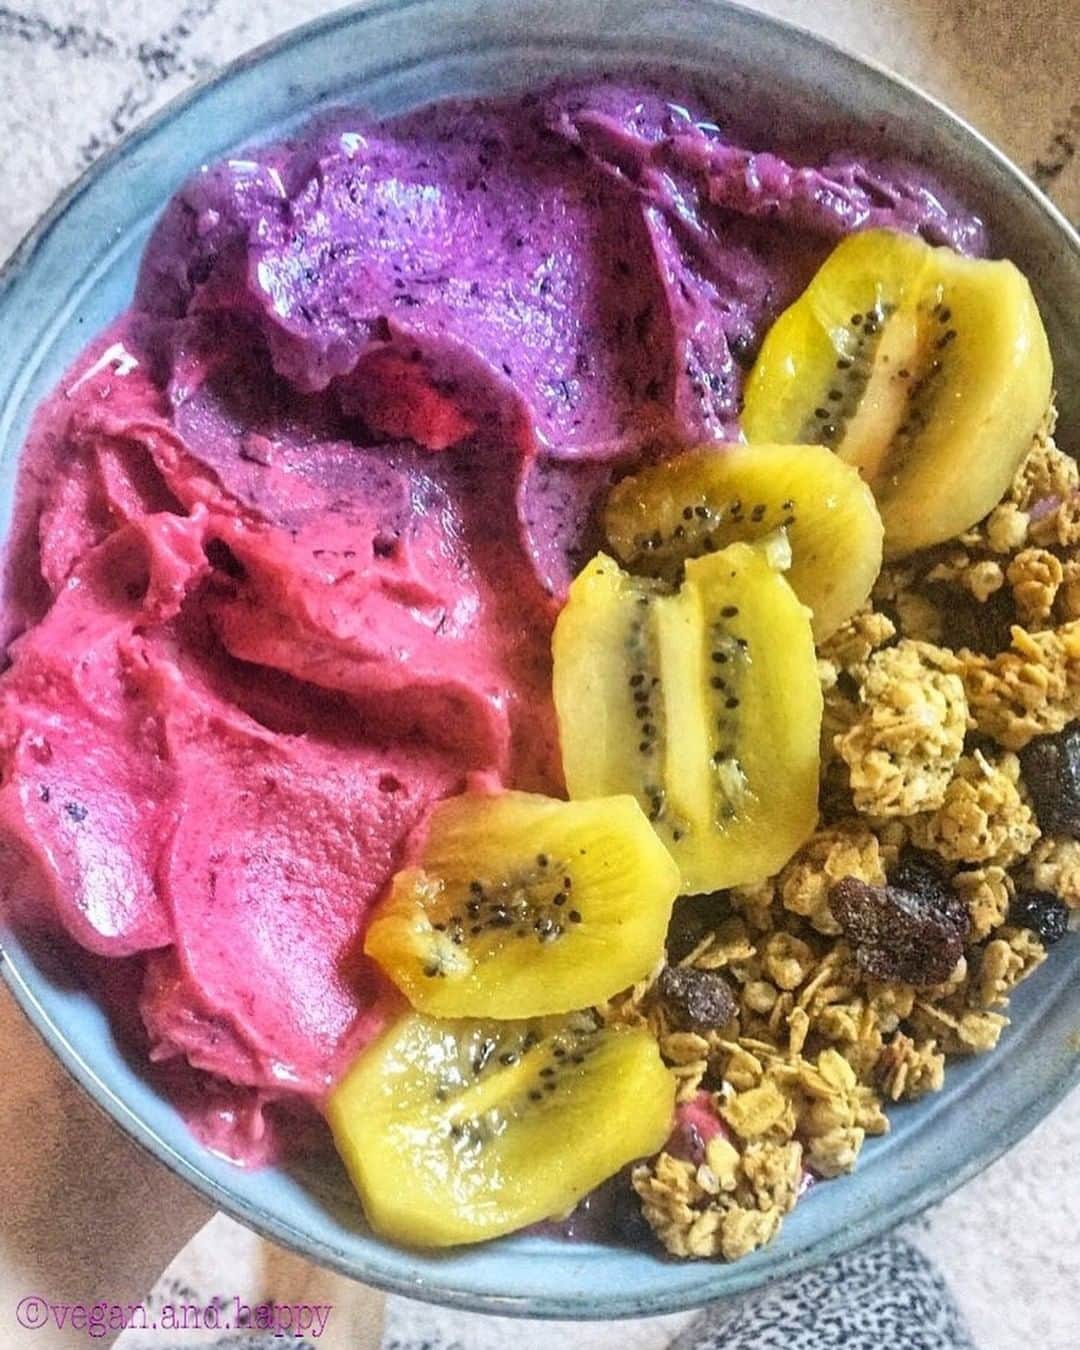 Yonanasのインスタグラム：「Does dessert brighten your day?  This colorful Yonanas bowl from @vegan.and.happy is adding some sunshine to our day!  This fruit-filled beauty is Cherry + Blackberry + Banana Yonanas nice cream topped with gluten-free granola and golden kiwis.」